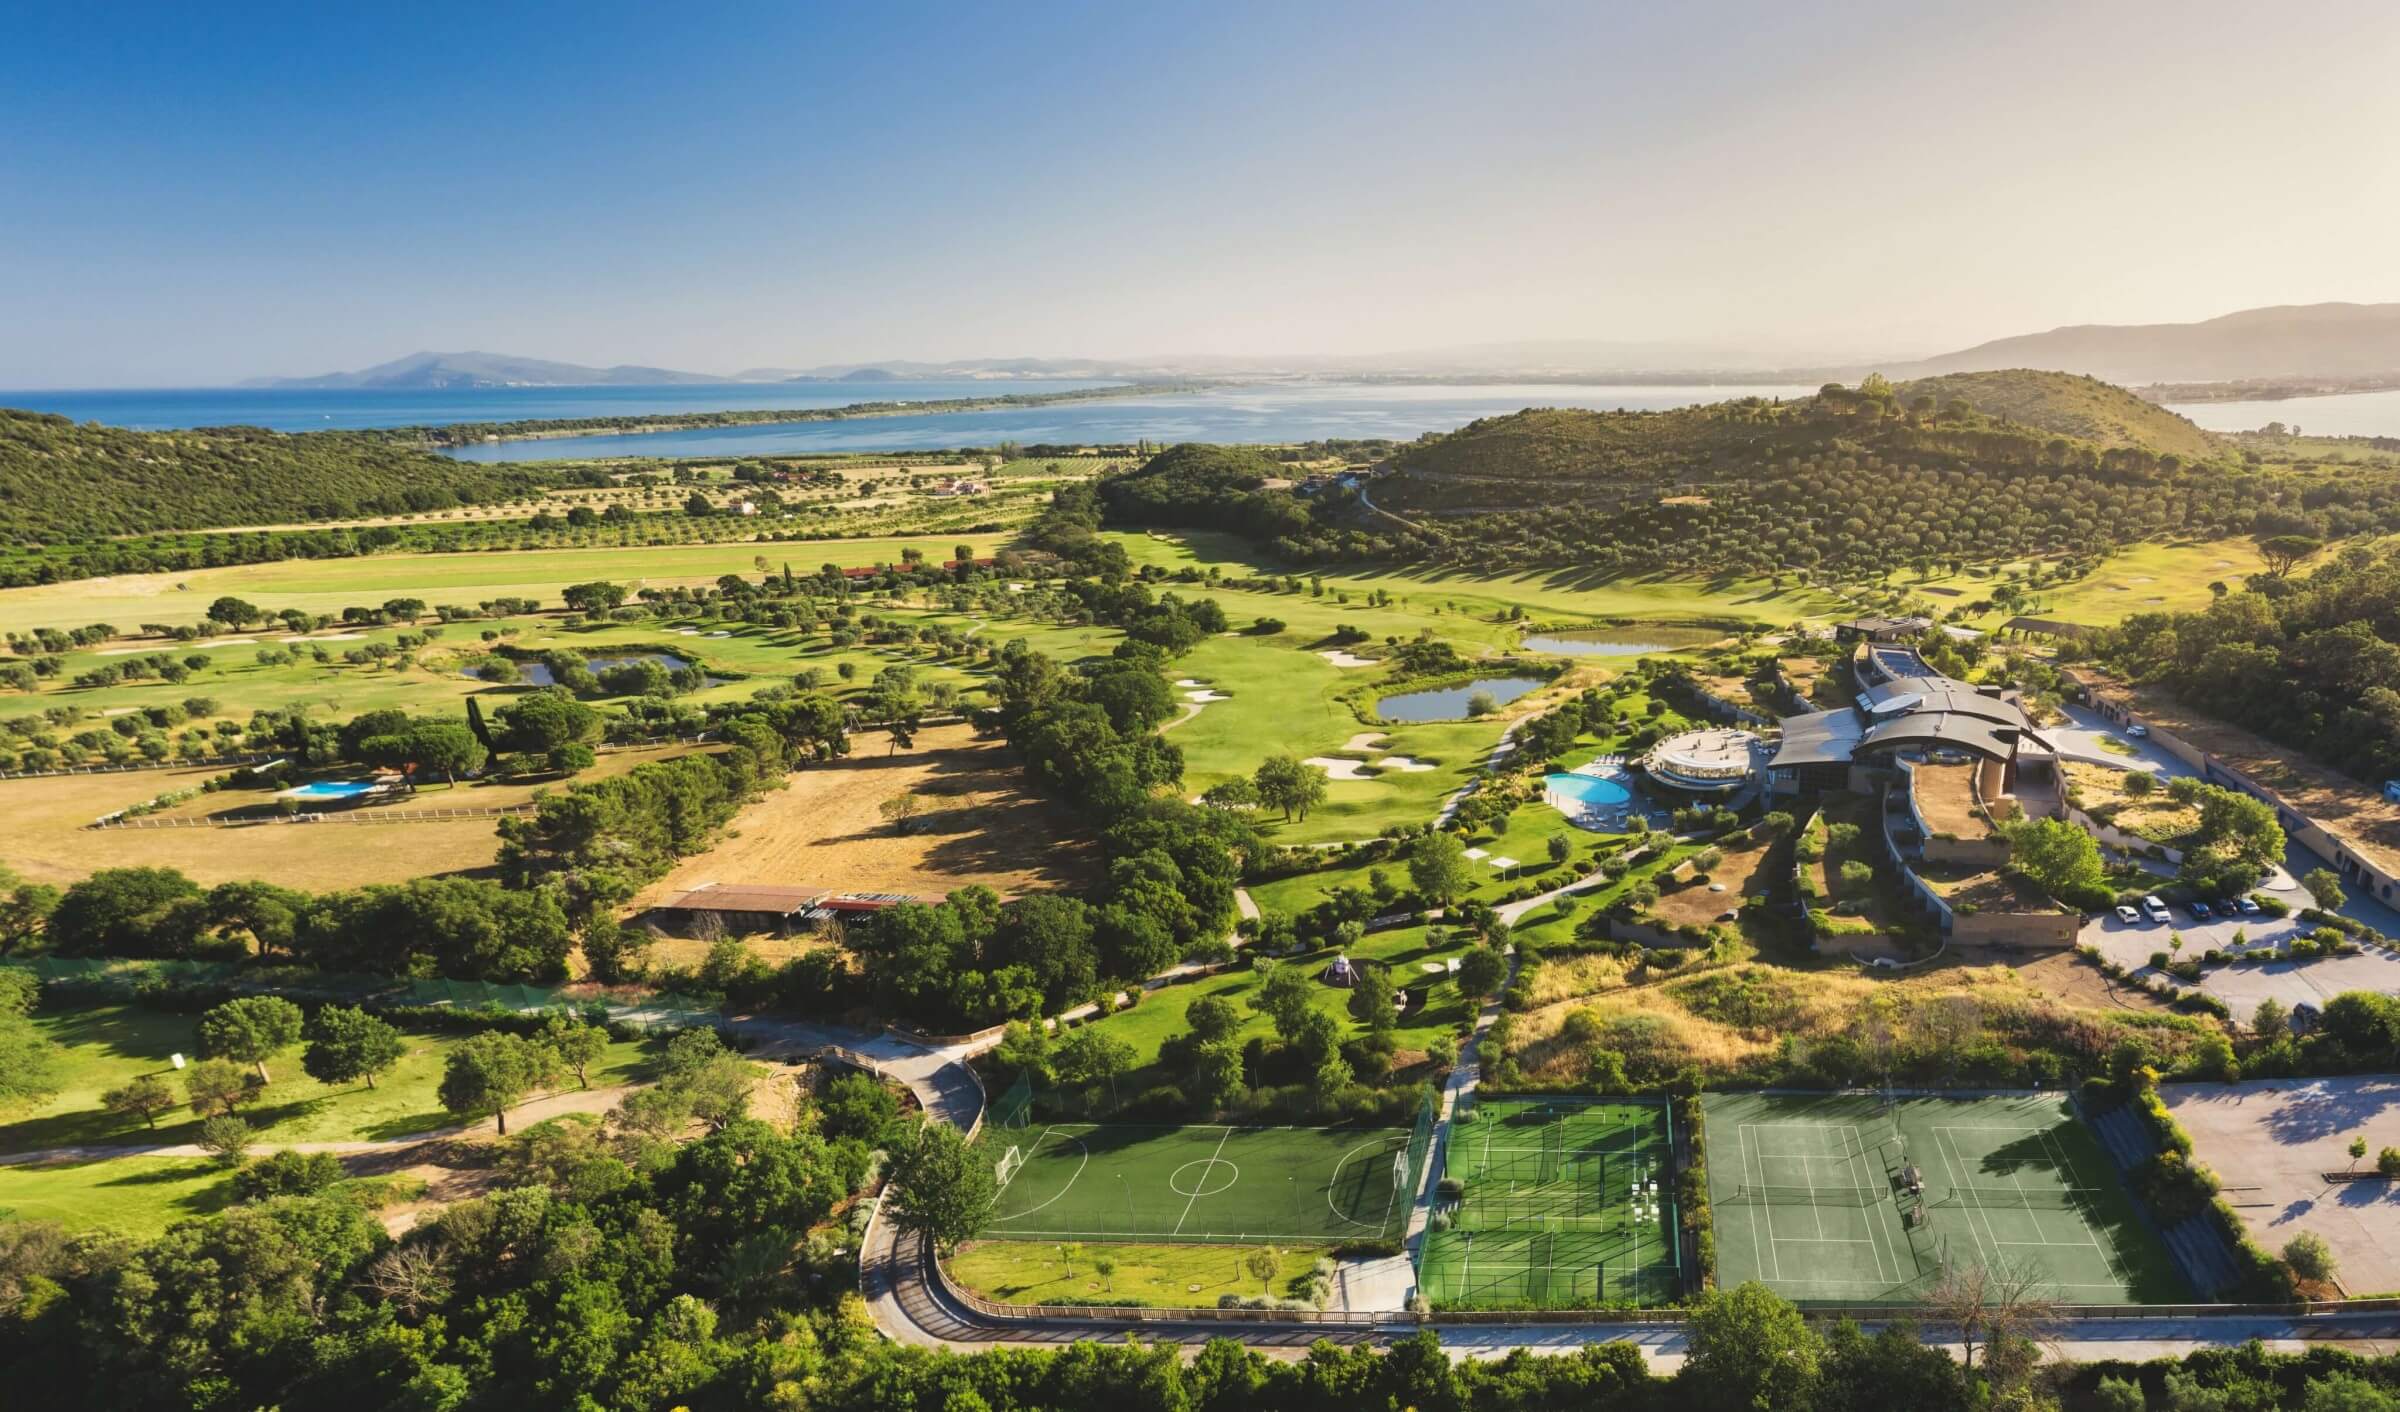 One of Italy’s Most Luxurious Golfing Destinations the Argentario Golf Resort & Spa to Reopen in June 2021